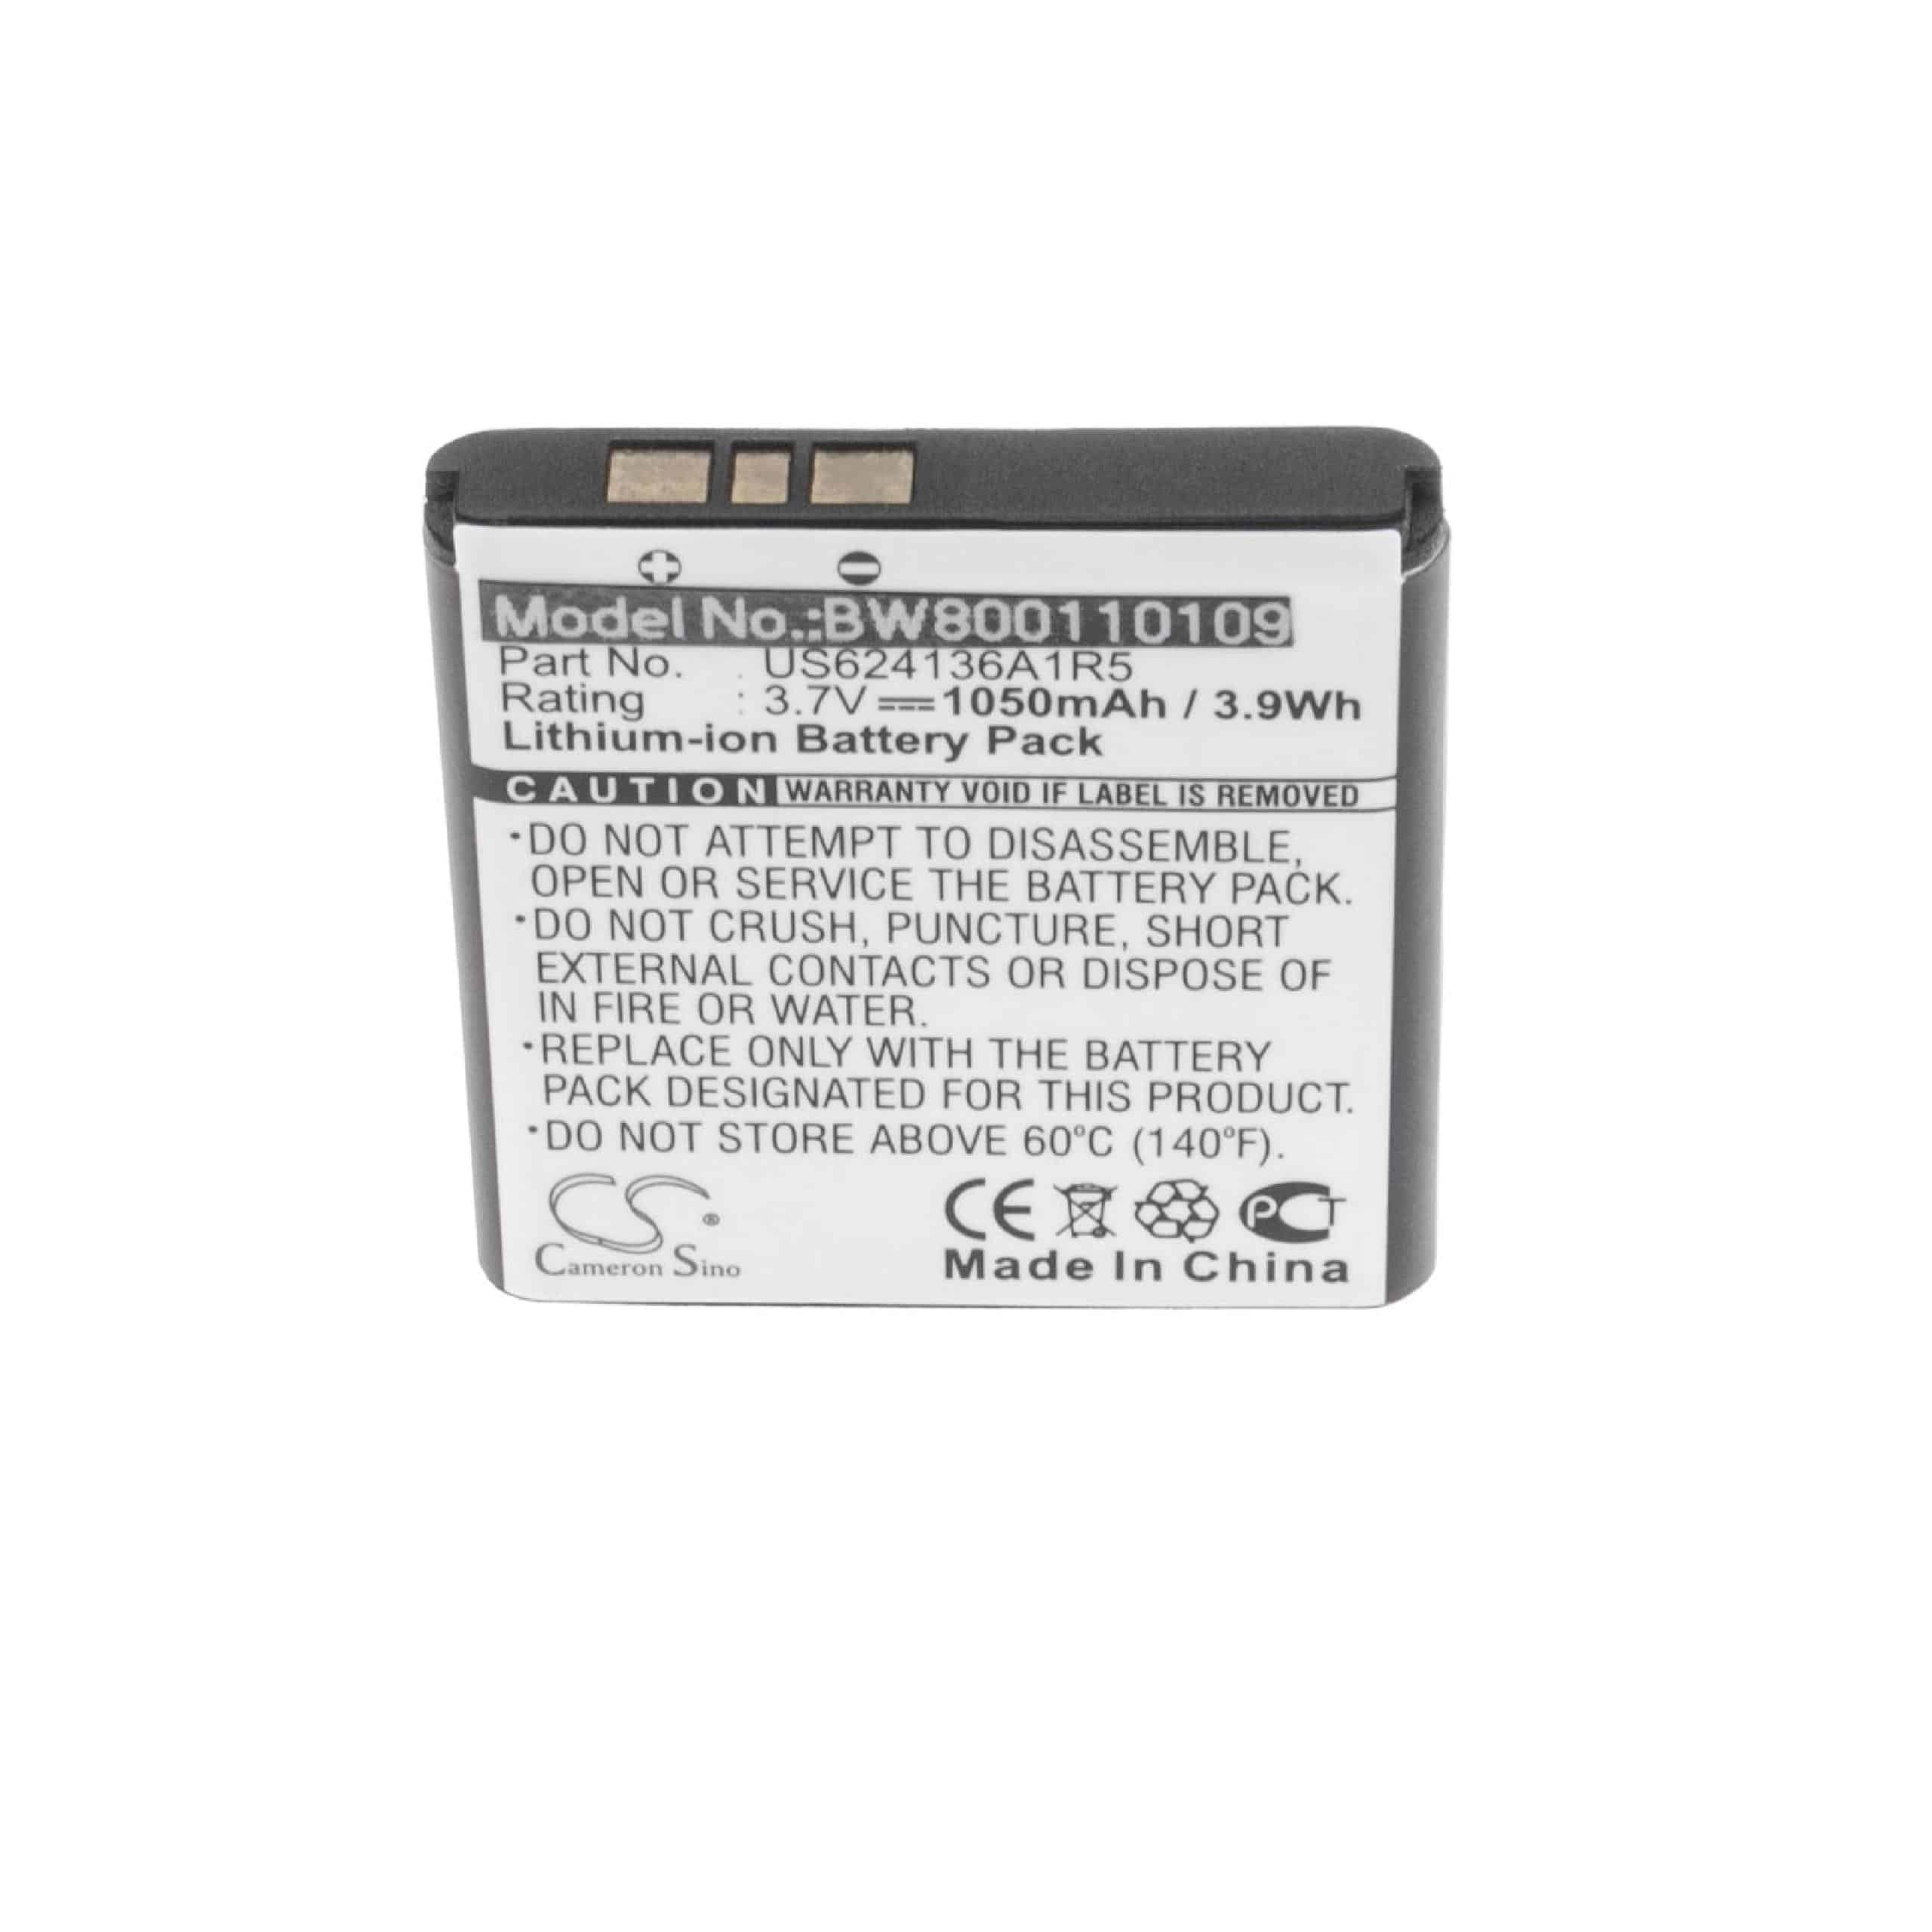 Battery Replacement for Spare US624136A1R5, KB-05 - 1050mAh, 3.73V, Li-Ion